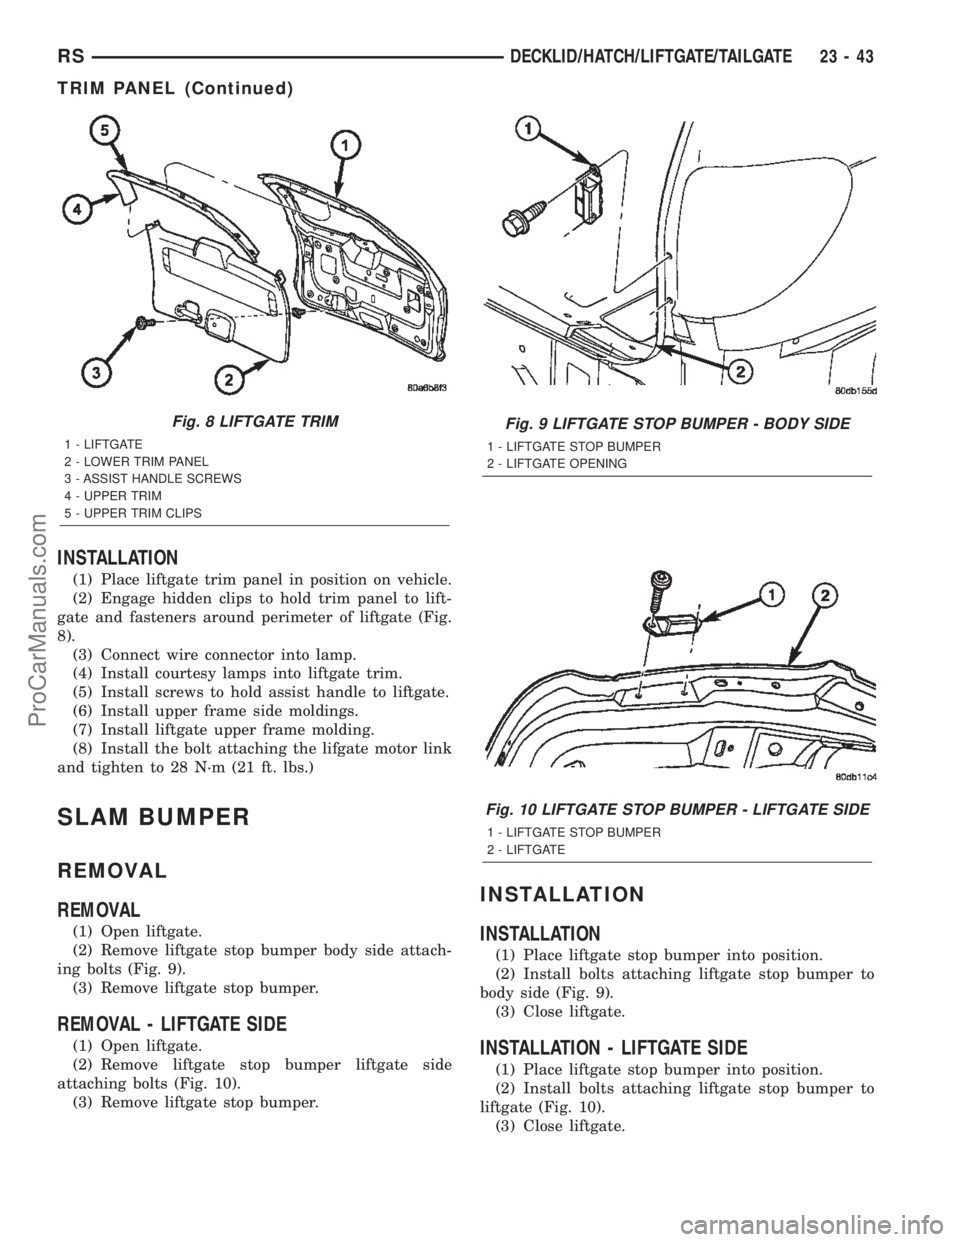 CHRYSLER VOYAGER 2002  Service Manual INSTALLATION
(1) Place liftgate trim panel in position on vehicle.
(2) Engage hidden clips to hold trim panel to lift-
gate and fasteners around perimeter of liftgate (Fig.
8).
(3) Connect wire connec